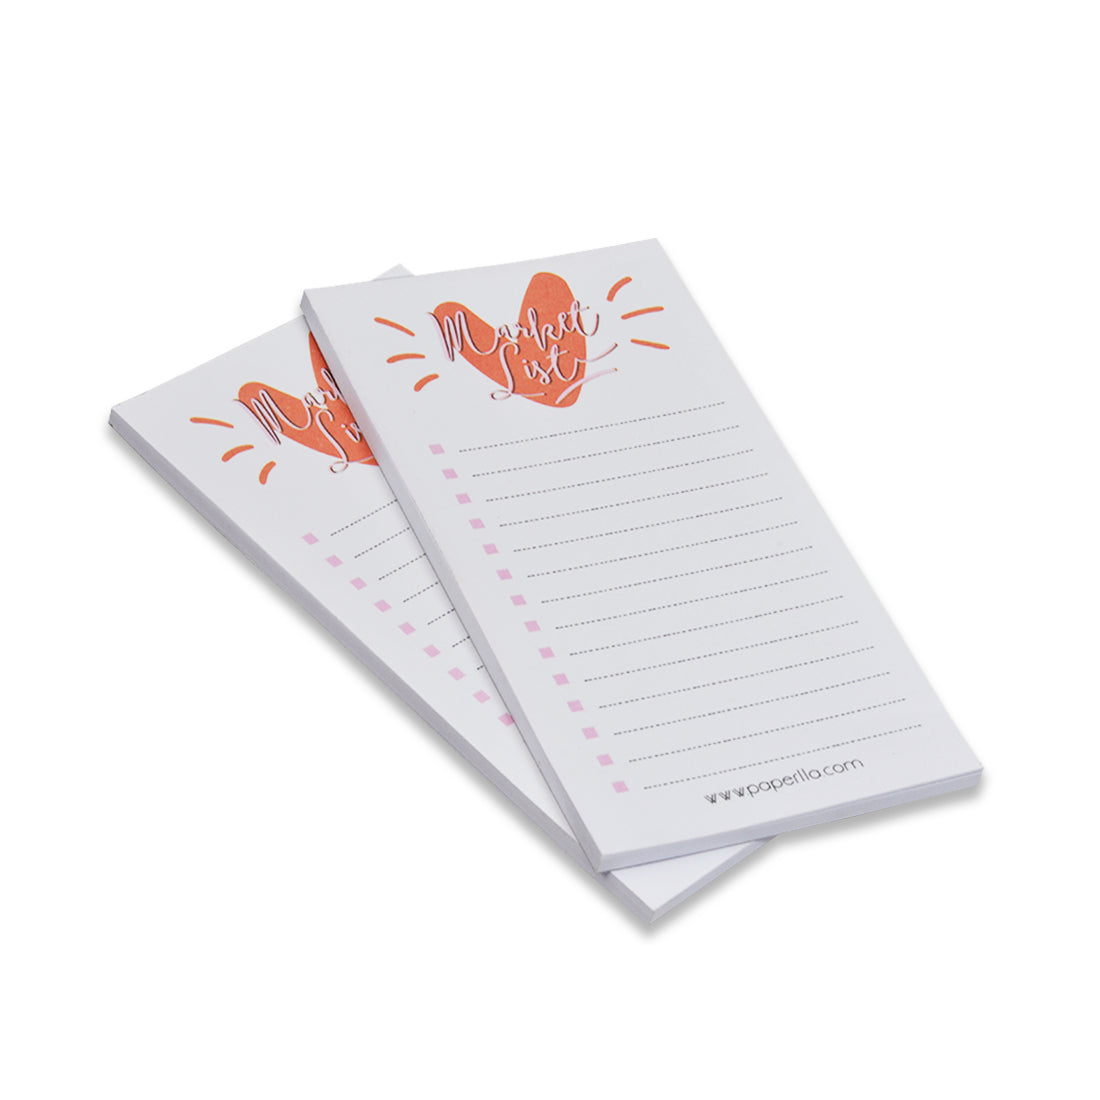 To Do List Notepad, Notes, to-Do’s, to-Buy, Priorities Memo Pad for Shopping Lists, Reminders and appointments Set of 10 Pads